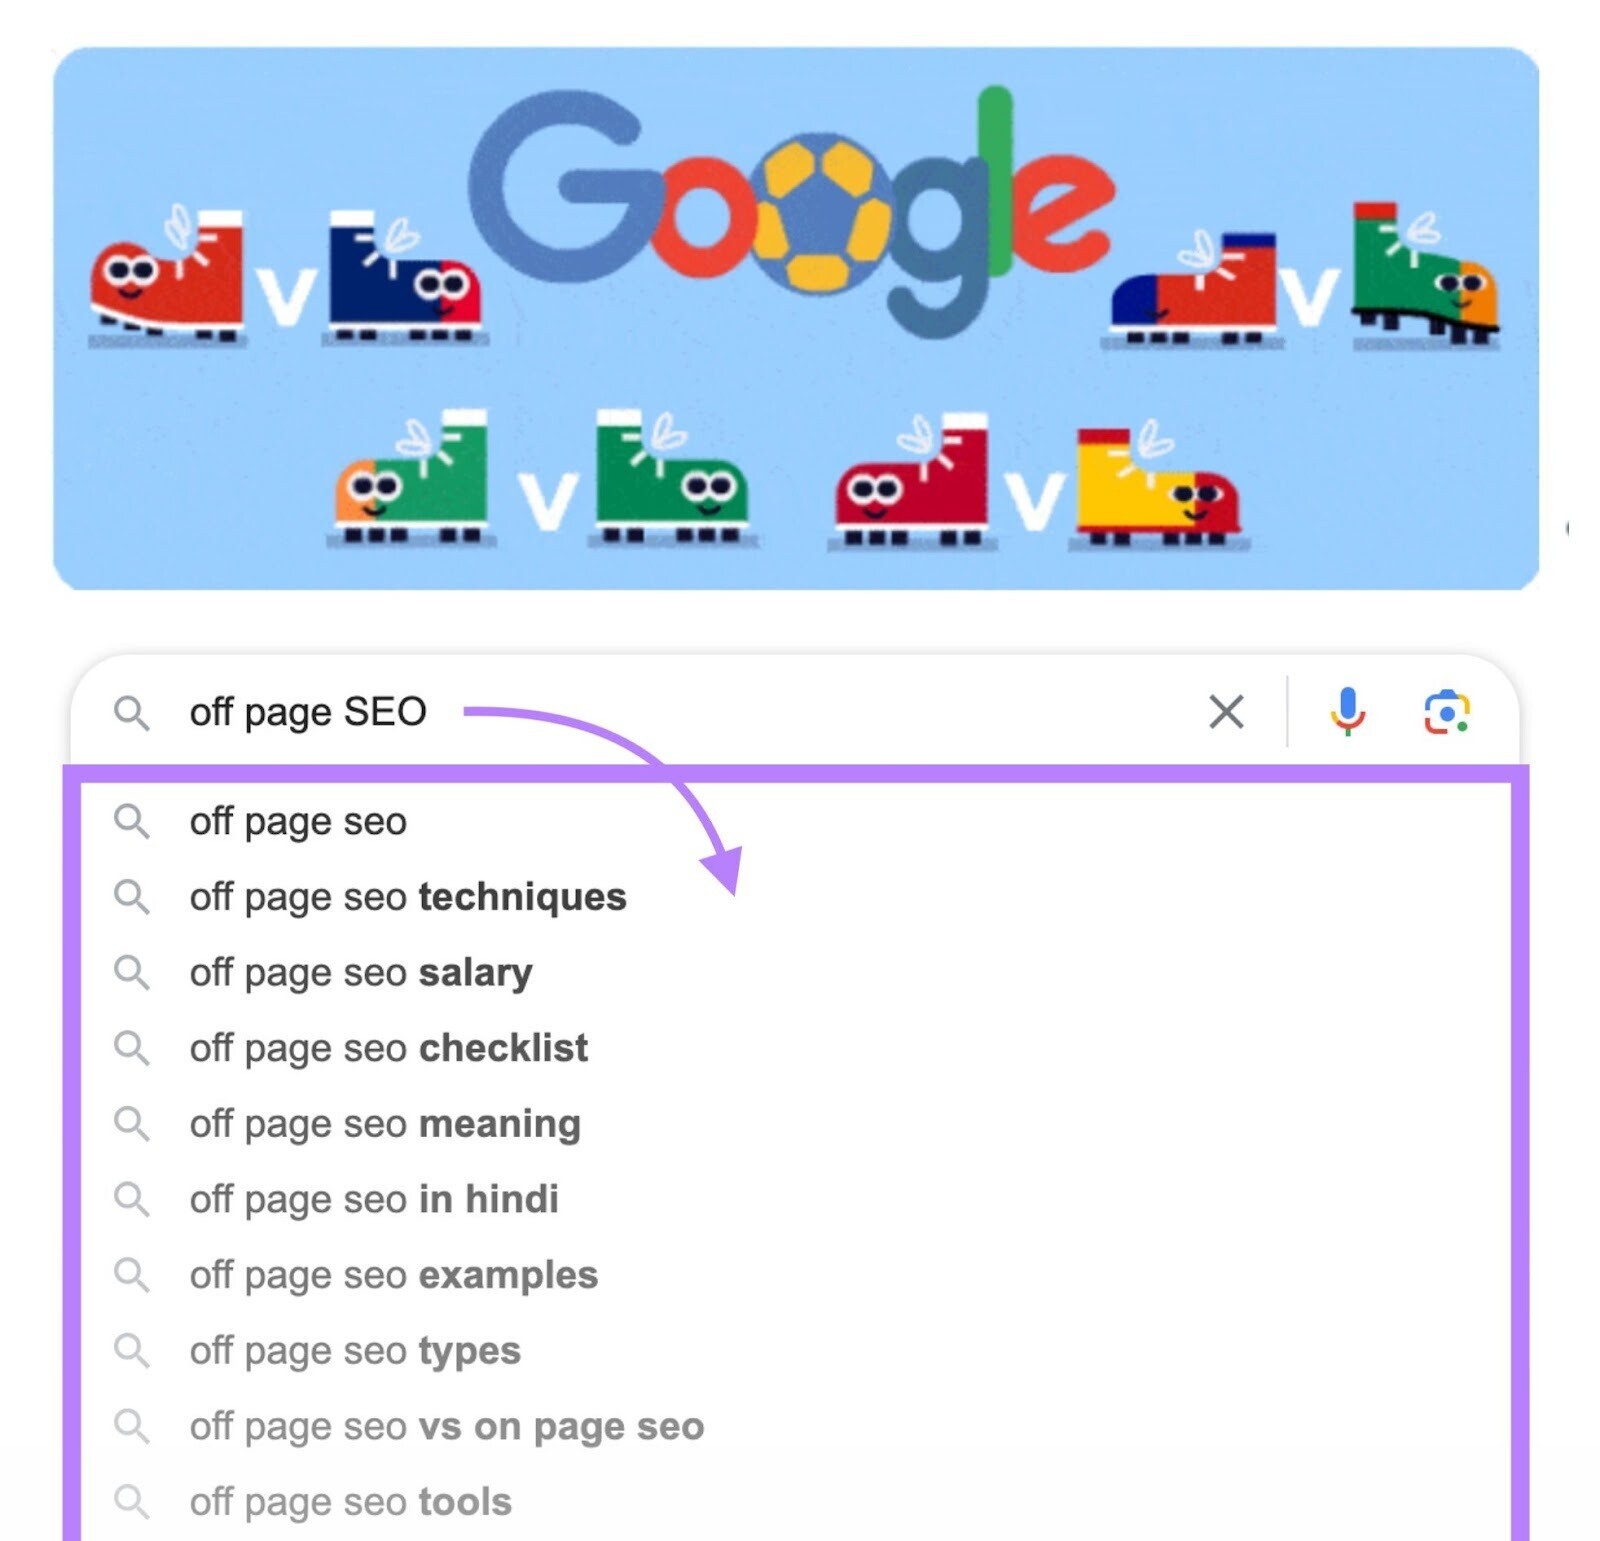 when typing “off page SEO” Google Autocomplete feature gives suggestions like: "“off page seo techniques," "“off page seo salary" etc.